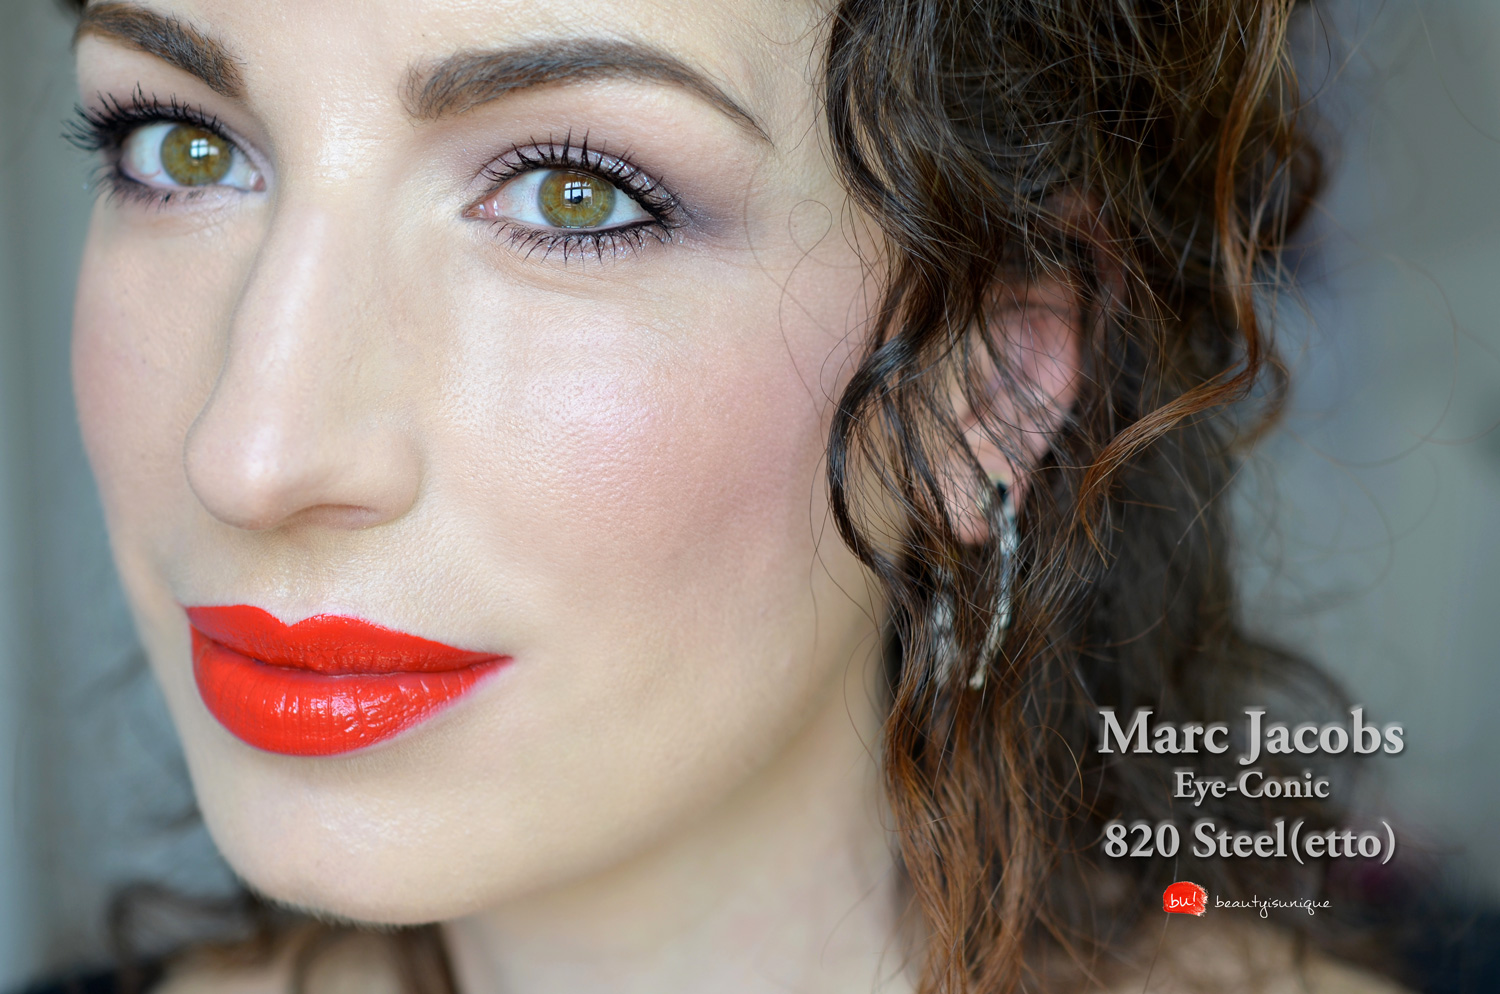 marc-jacobs-steeletto-820-eye-conic-swatches